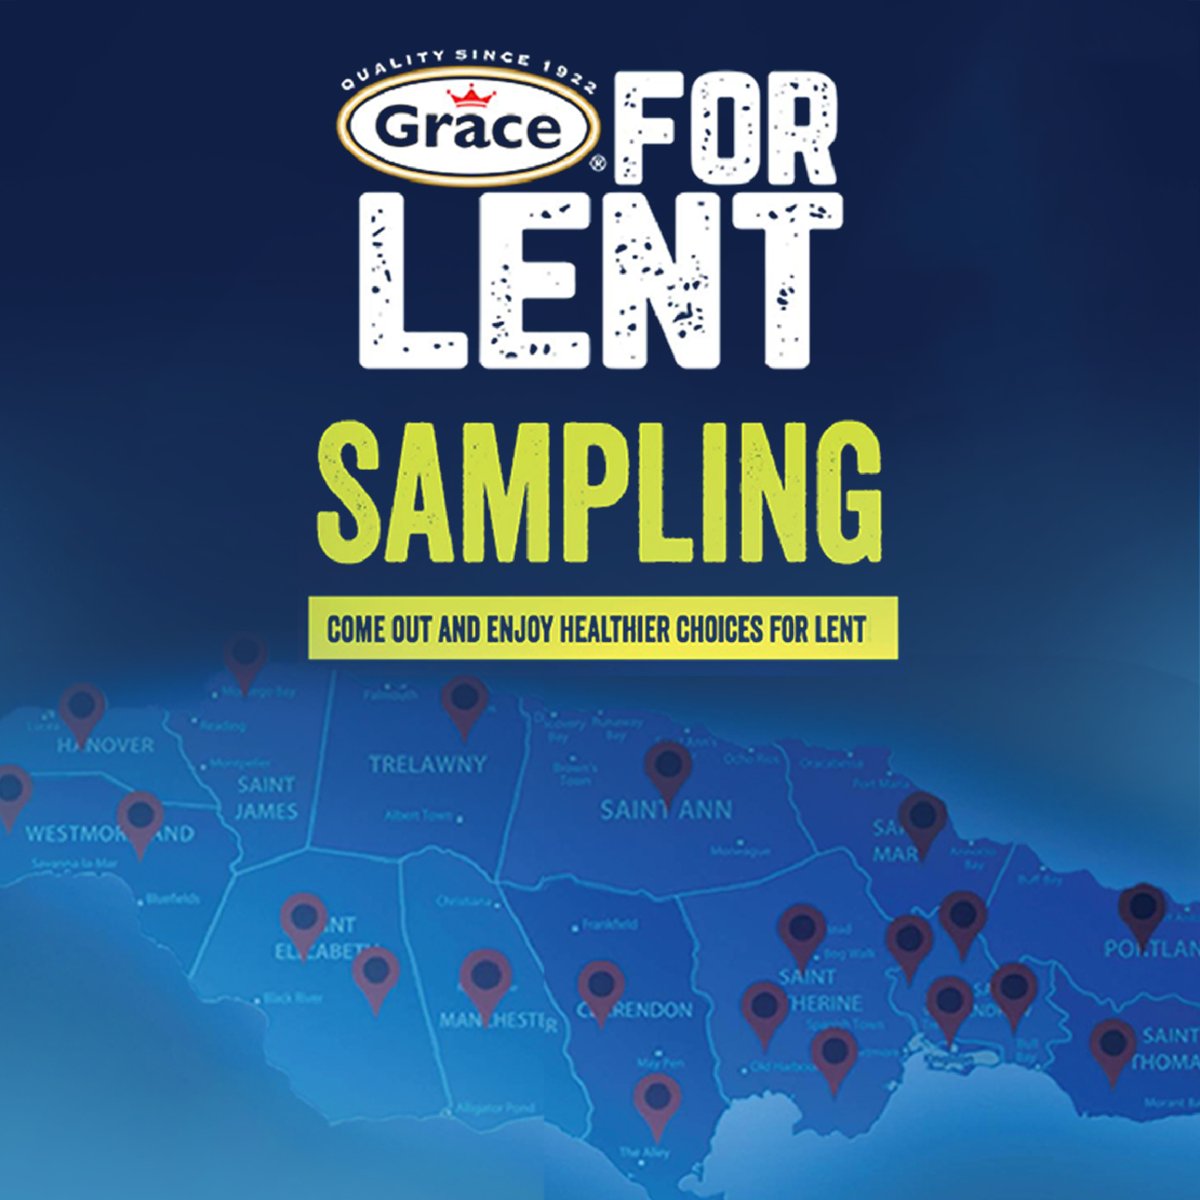 A #HealthierChoiceForLent is definitely the way to go! Check out our page to see where you can catch us and #GoGraceForLent! 😃 #GoGraceForLent #HealthierChoiceForLent